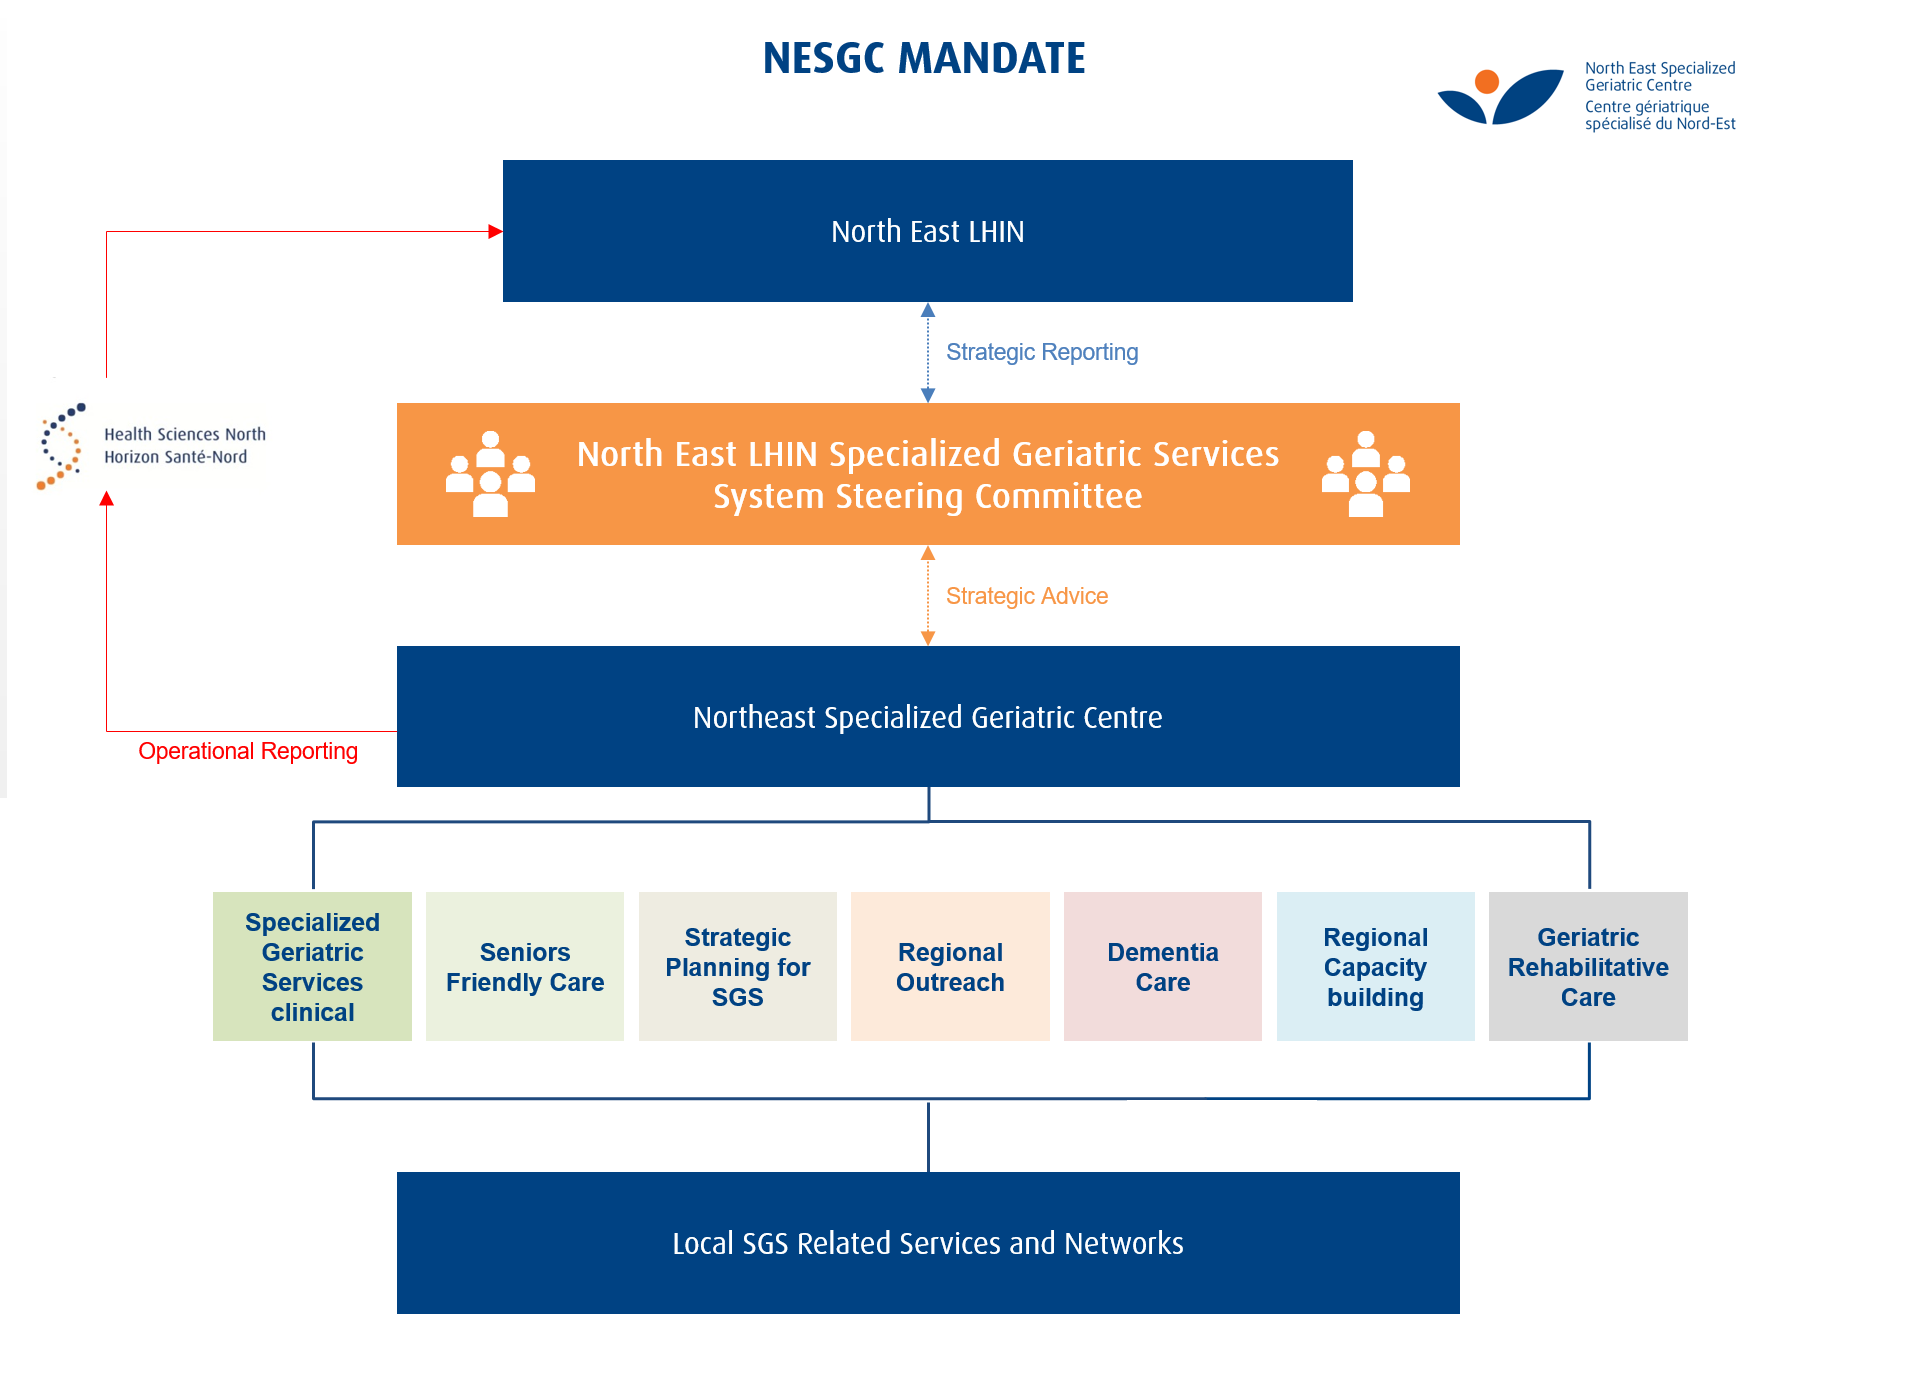 A flowchart of the mandate of the North East Specialized Geriatric Centre as described in the paragraph below.